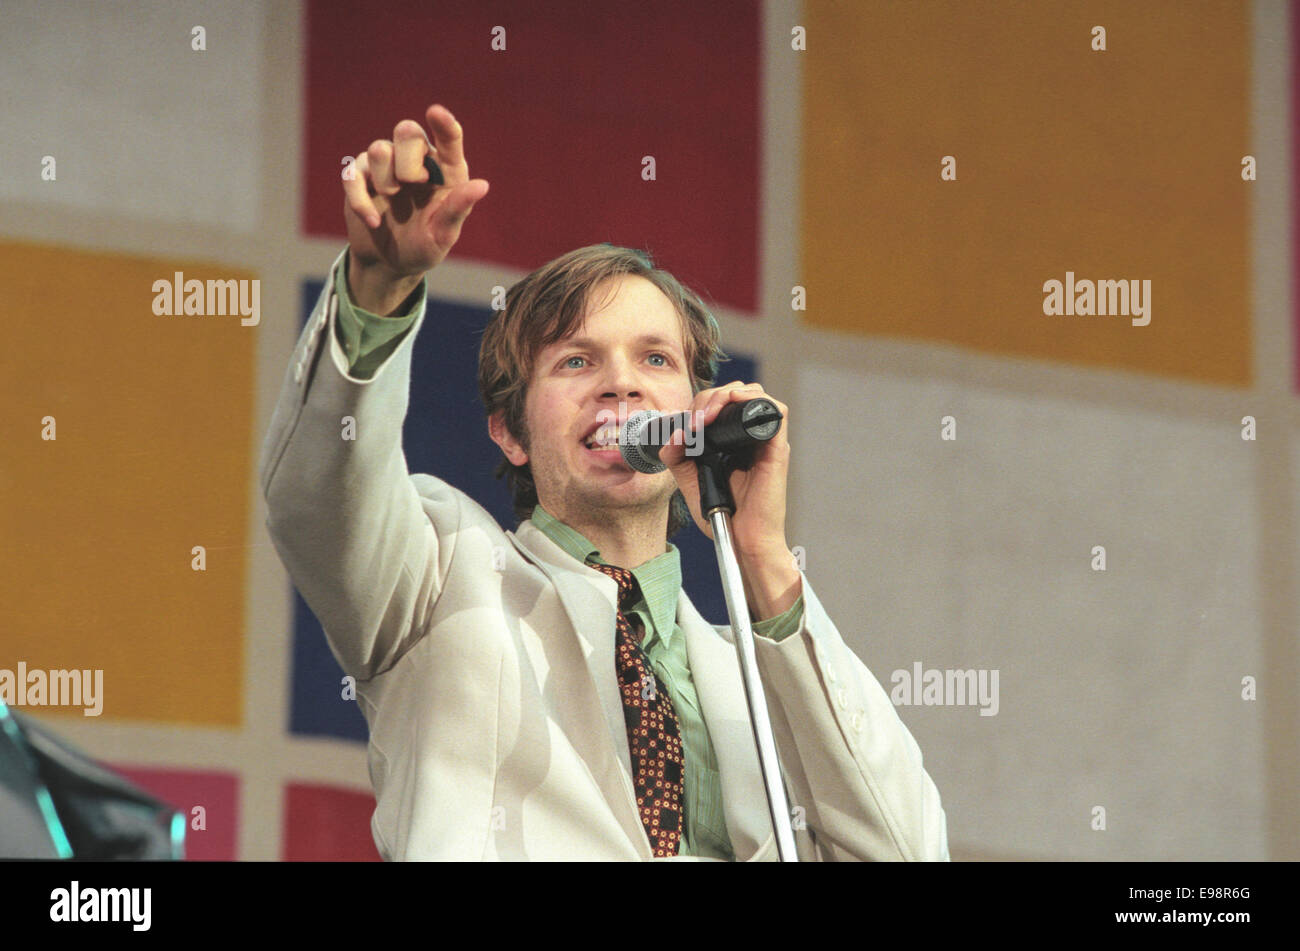 Beck in concert on stage at 'V97' music festival, in England, in August 1997. Stock Photo